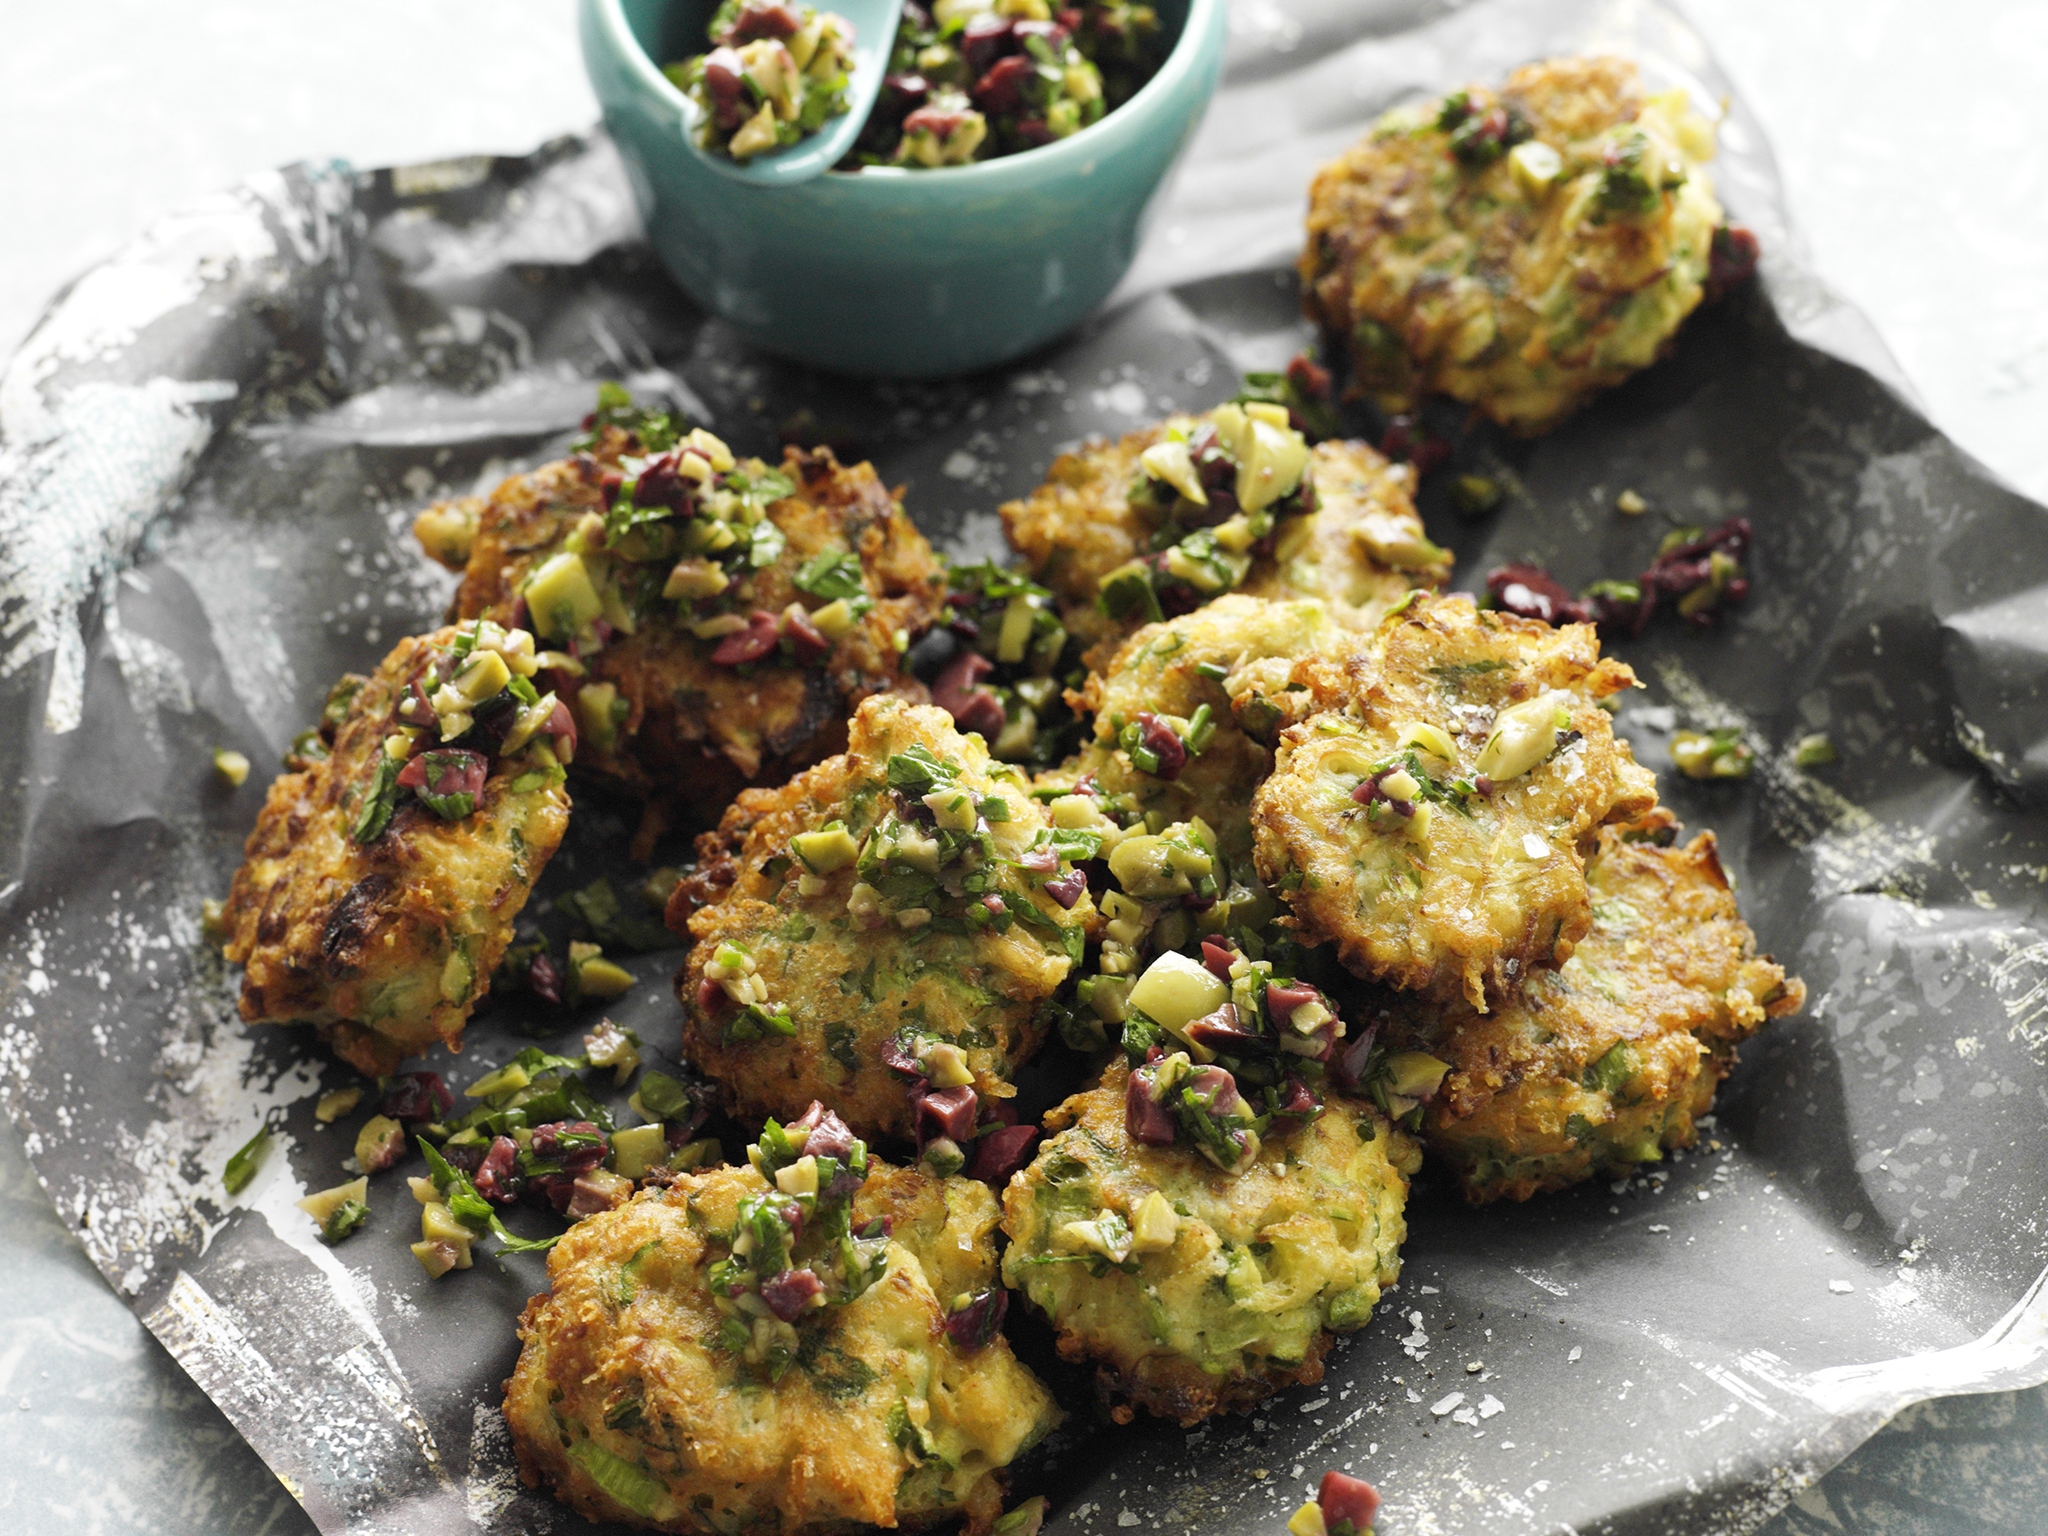 Artichoke and asparagus fritters with olive relish